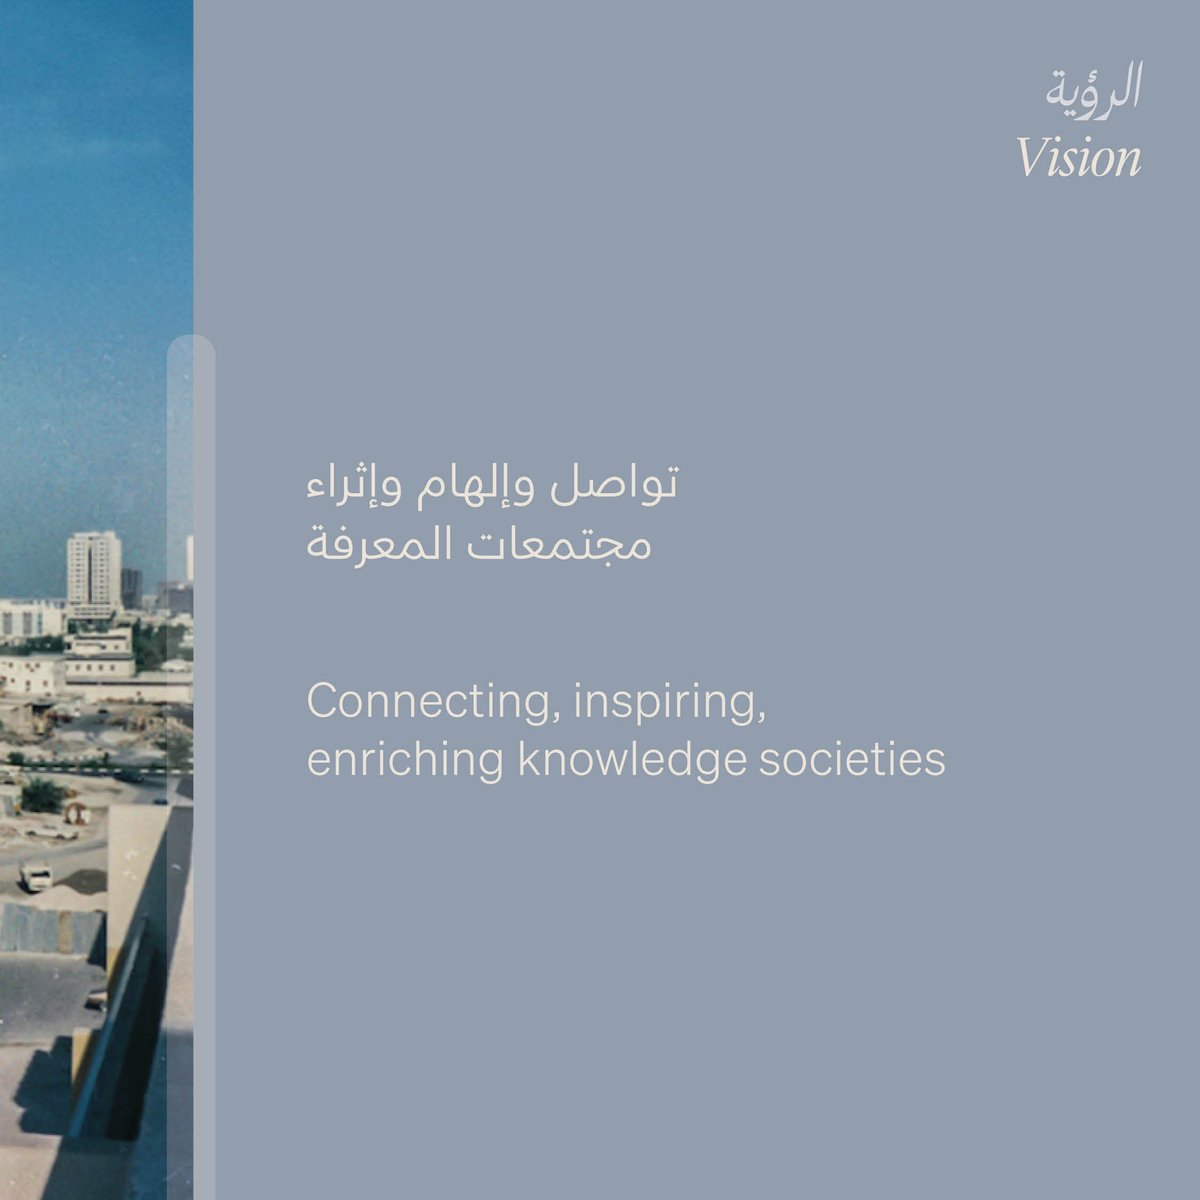 We inspire and enrich knowledge societies to build solid cultural foundations about the heritage, history and legacy of the UAE, so upcoming generations through them strive towards the progress of society.

#NLA #nationallibraryandarchives #NationalLibrary #PowerOfConnection